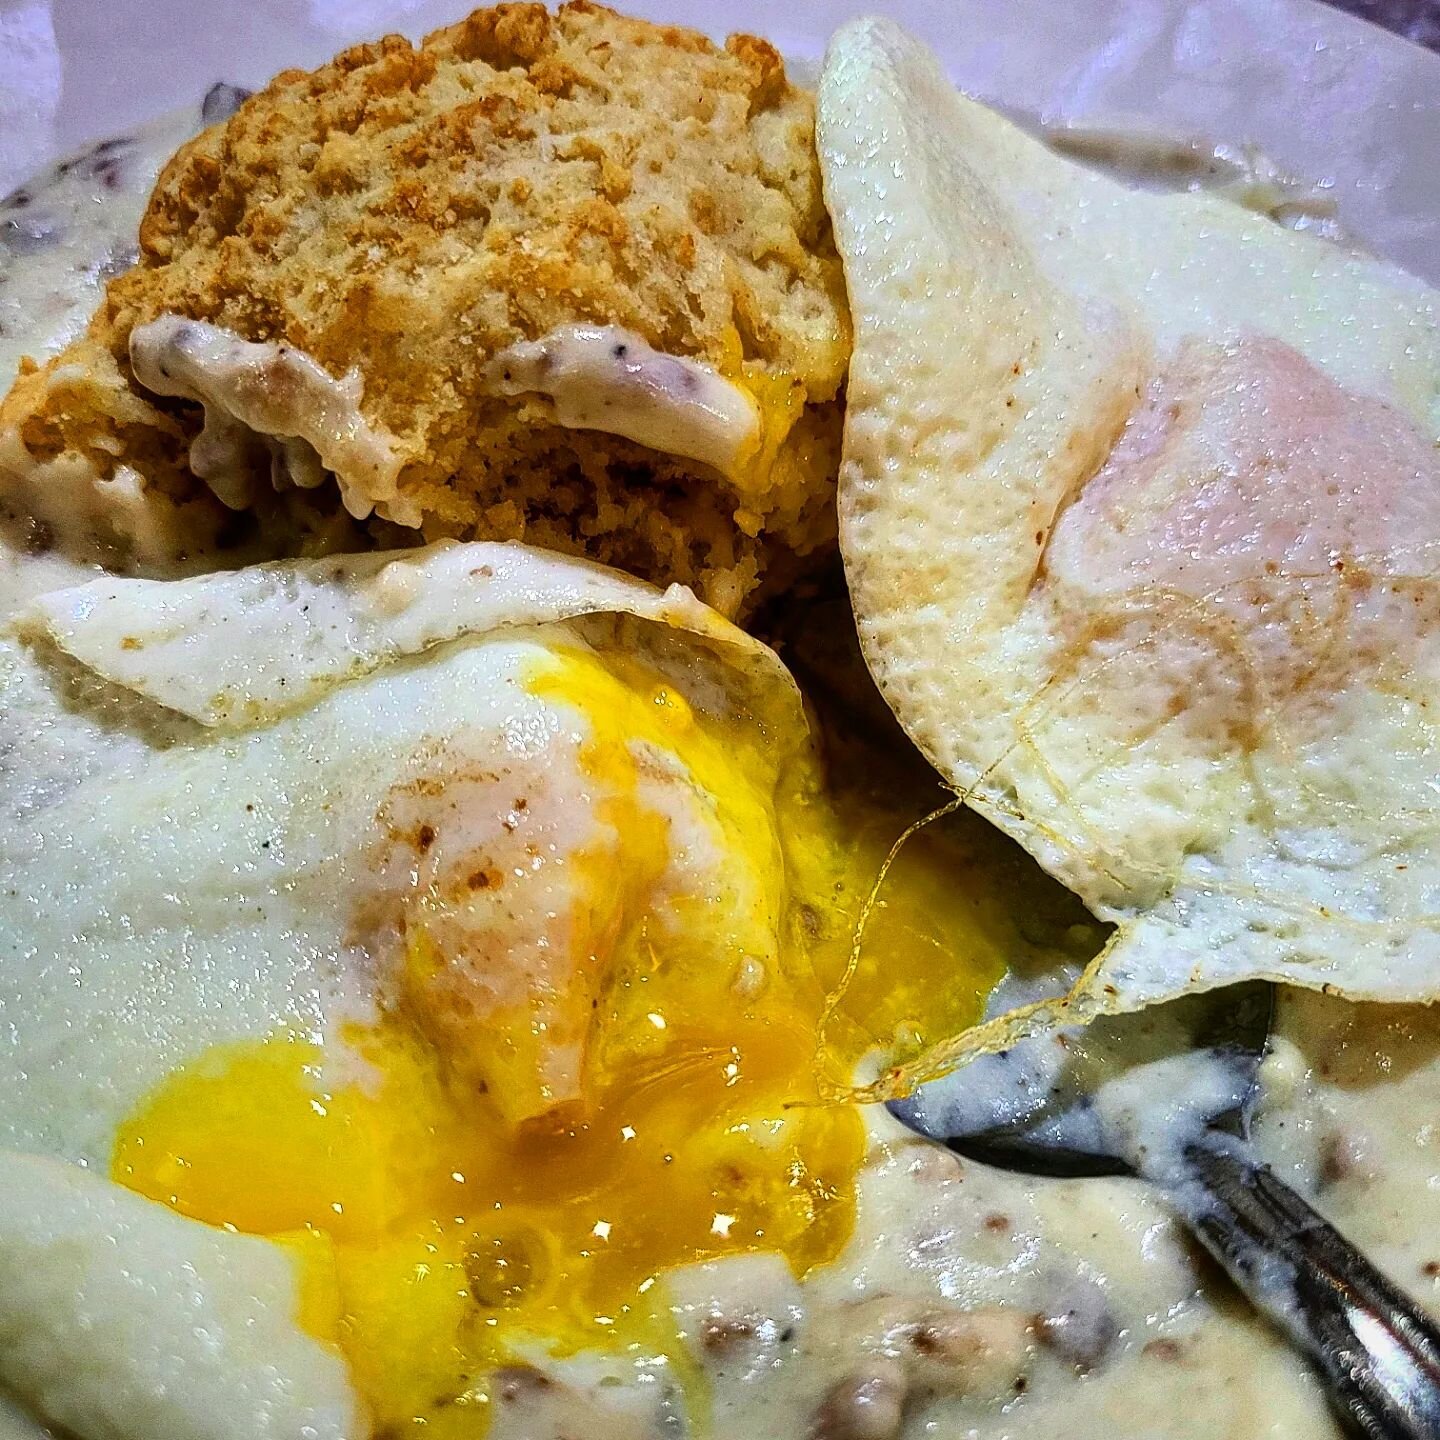 The Quickway Diner... Is The Place To Be!... passing through Bloomingburg NY, on my way home from an amazing gig with Zikrayat last night, and getting to smear those over-easy egg yolks all over my homemade biscuit with sausage gravy is the ultimate 